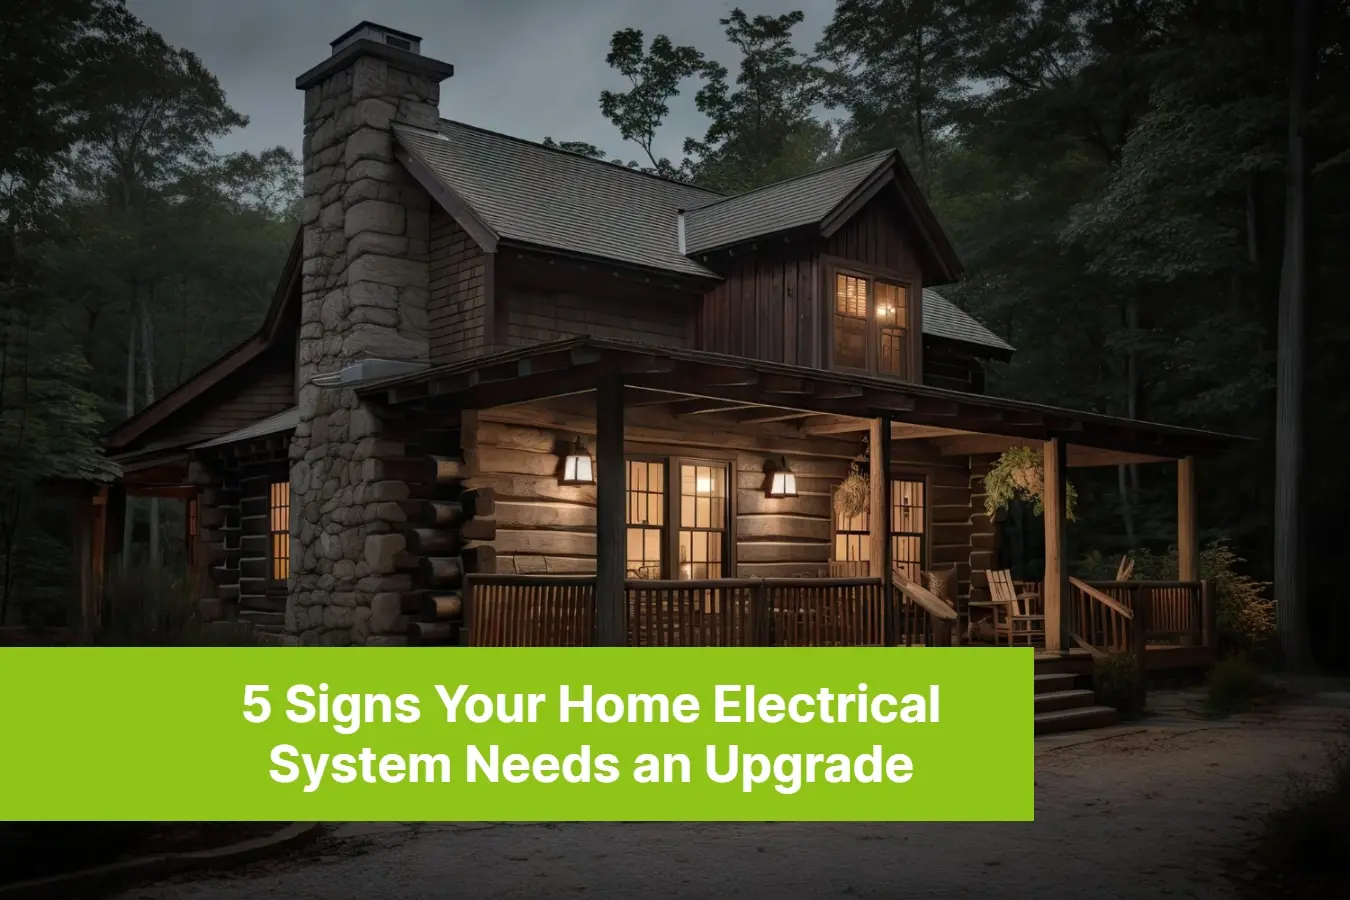 5 Signs Your Home Electrical System Needs an Upgrade